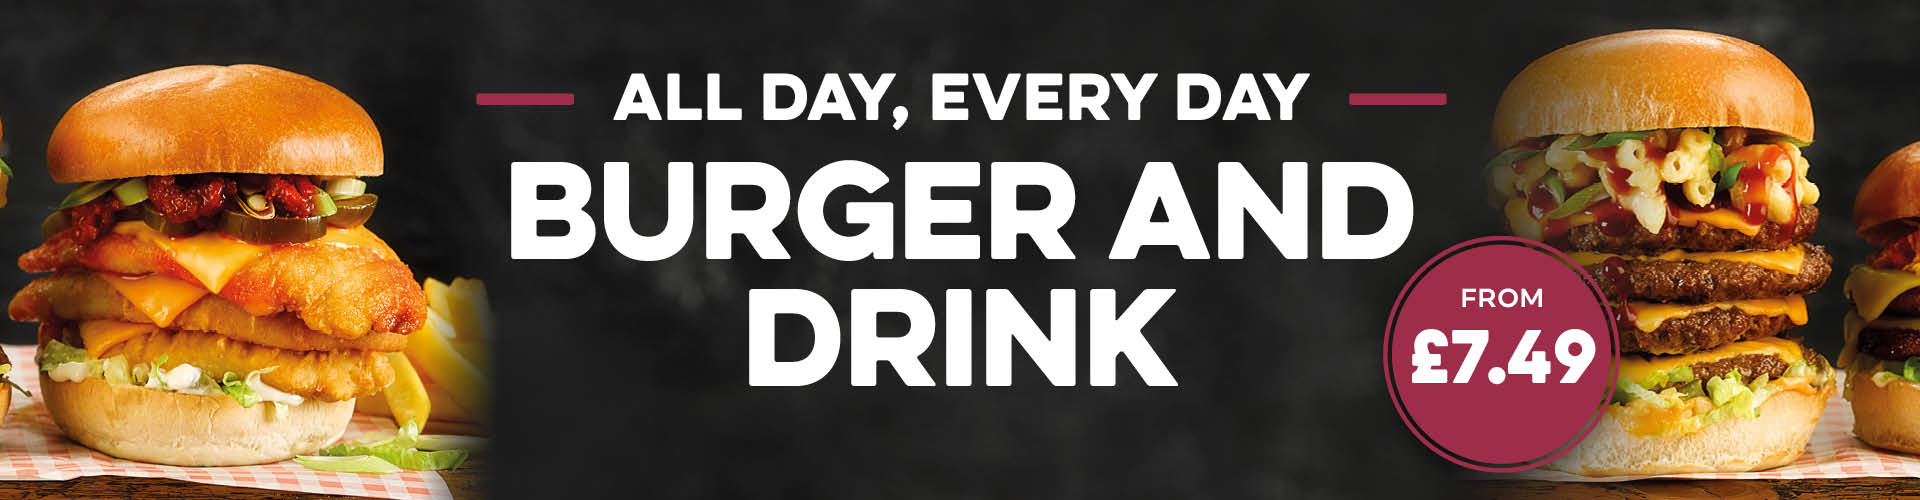 Enjoy a burger and a soft drink from just £7.49